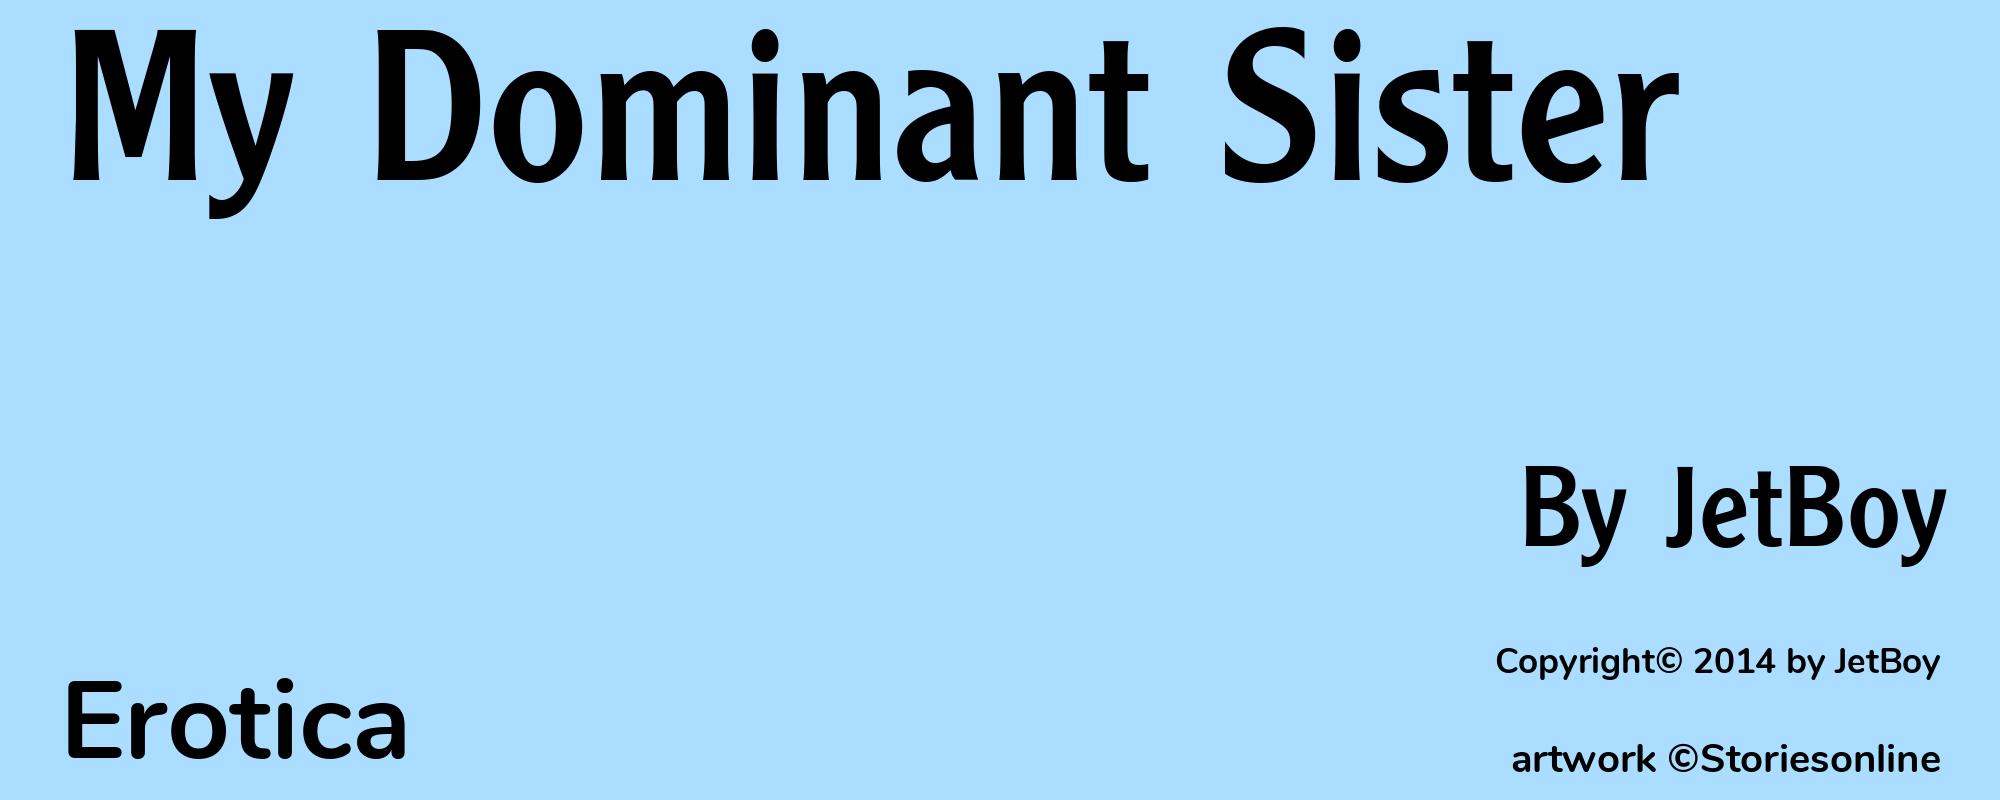 My Dominant Sister - Cover